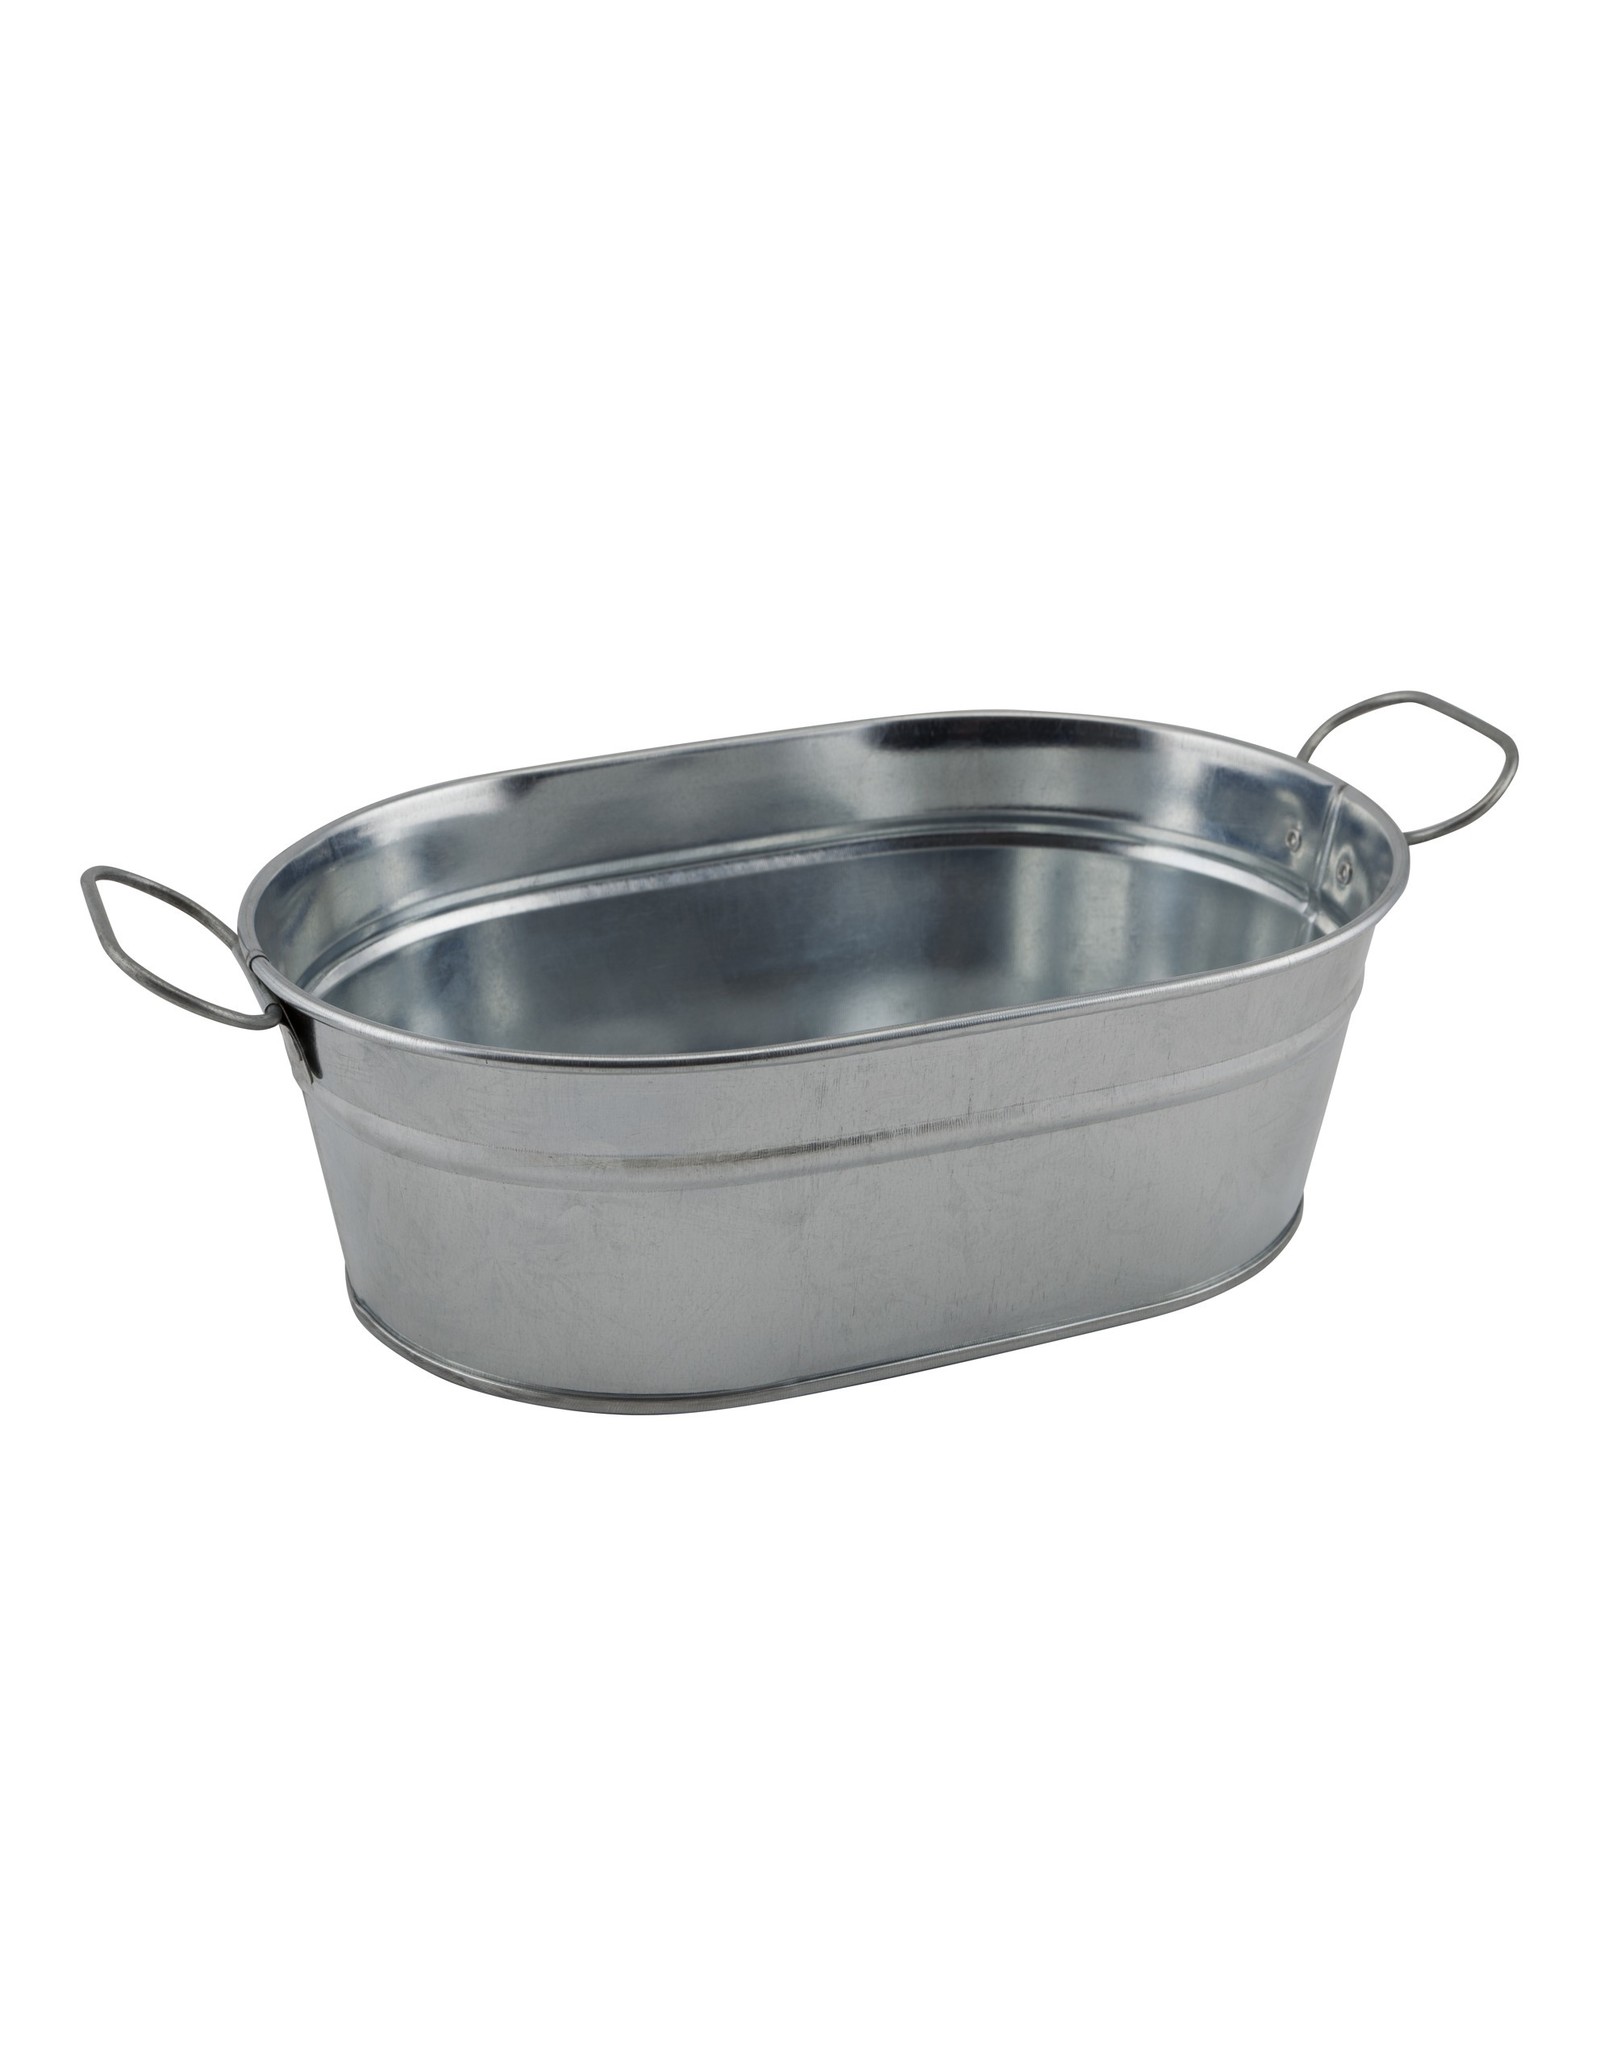 Stylepoint Galvanised steel Serving Bucket oval 23 x 15 cm